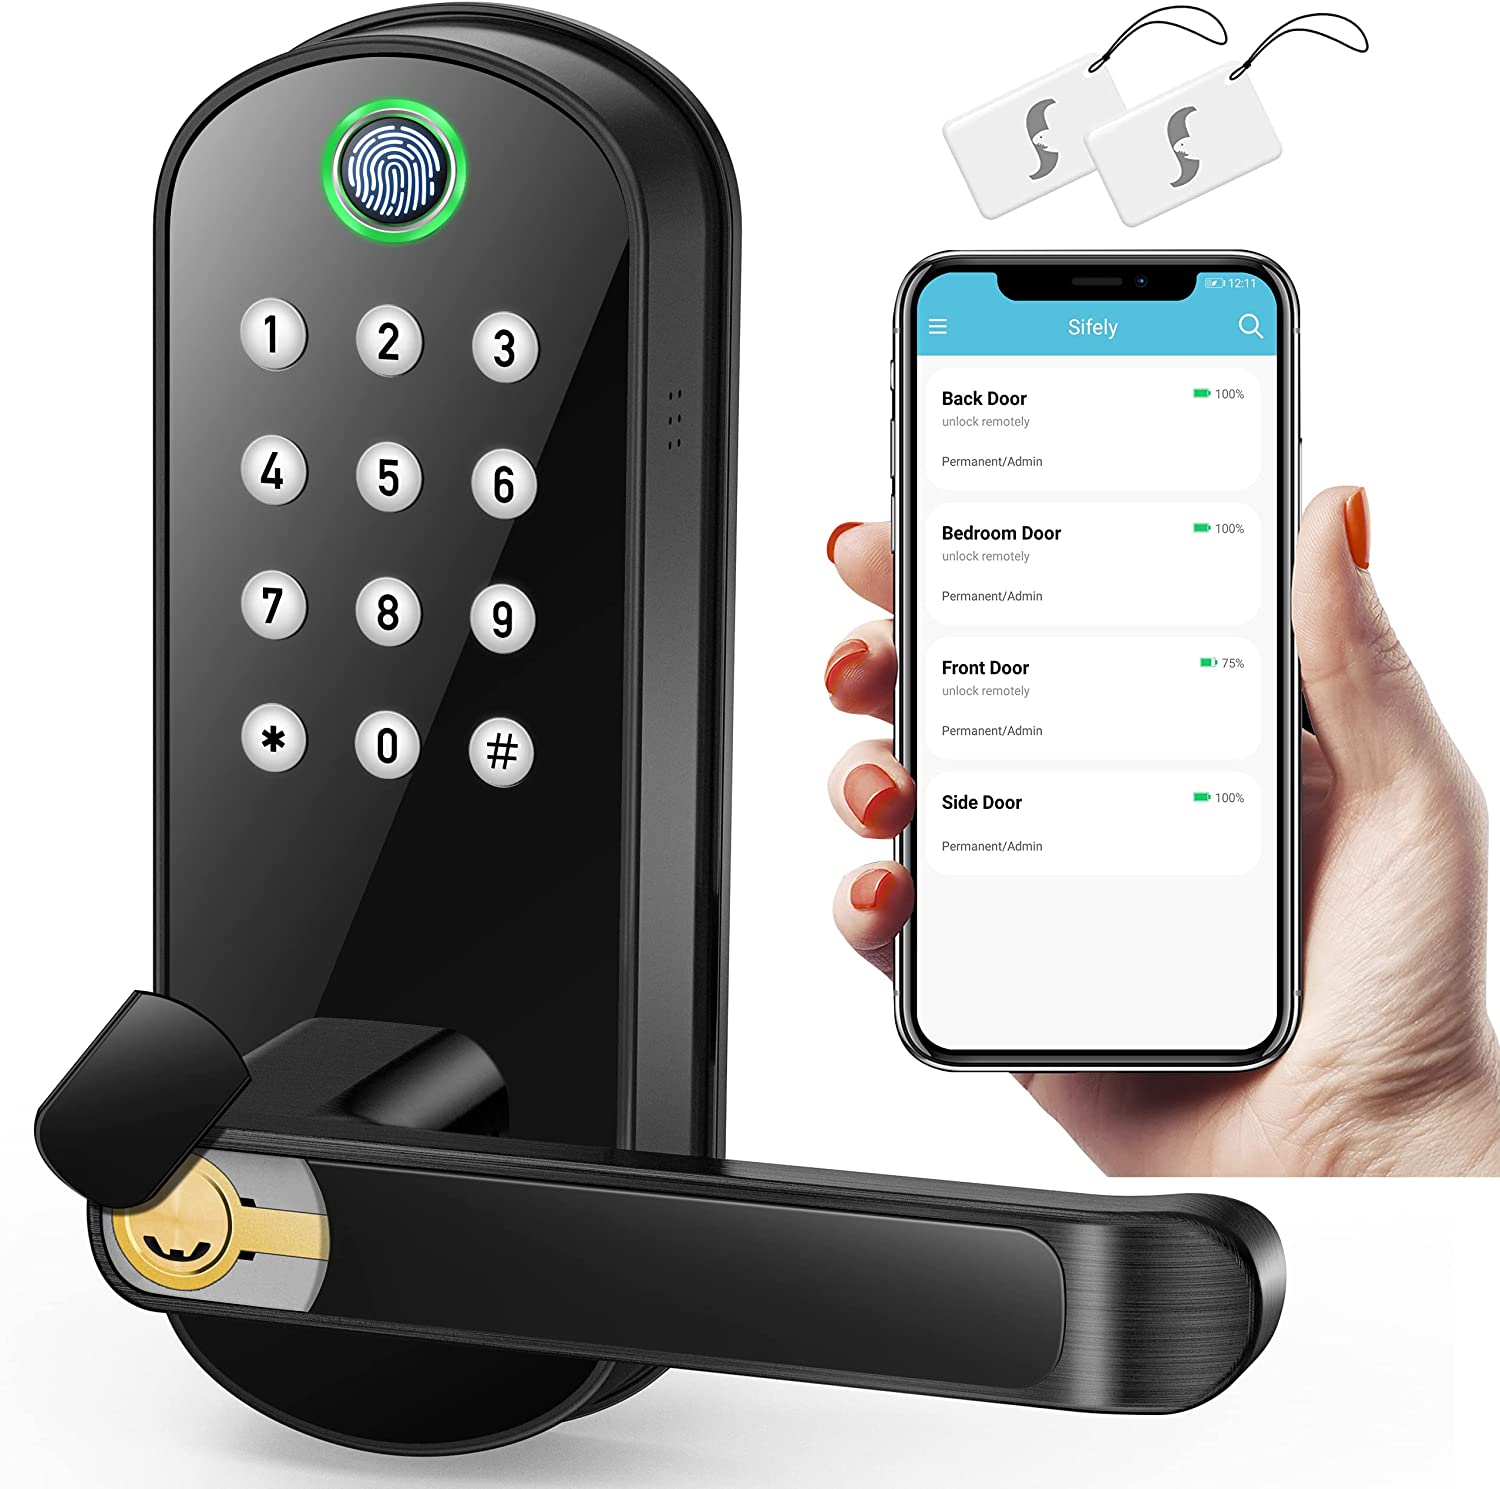 Sifely Easy Install Automatic Door Lock For Homes